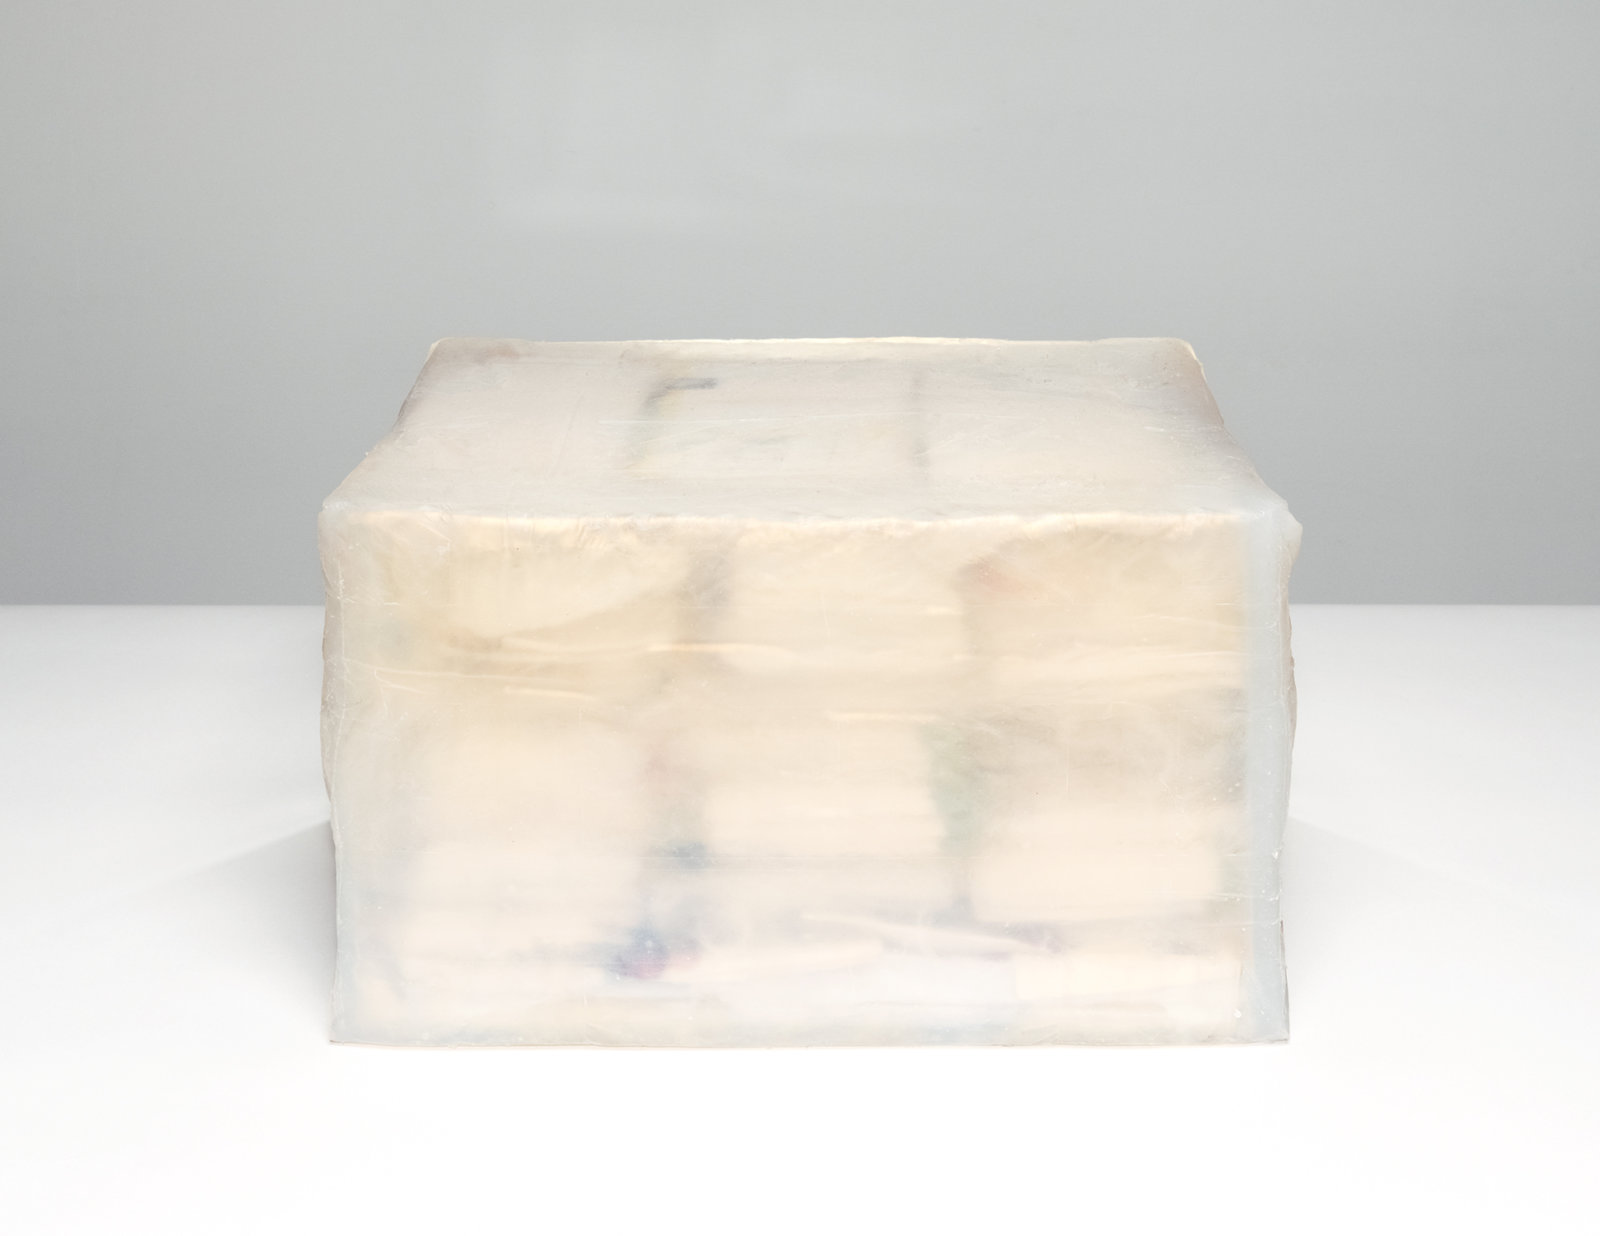 Liz Magor, All the Names II, 2014, silicone rubber, cotton textiles, paper, 11 x 17 x 13 in. (27 x 43 x 33 cm)